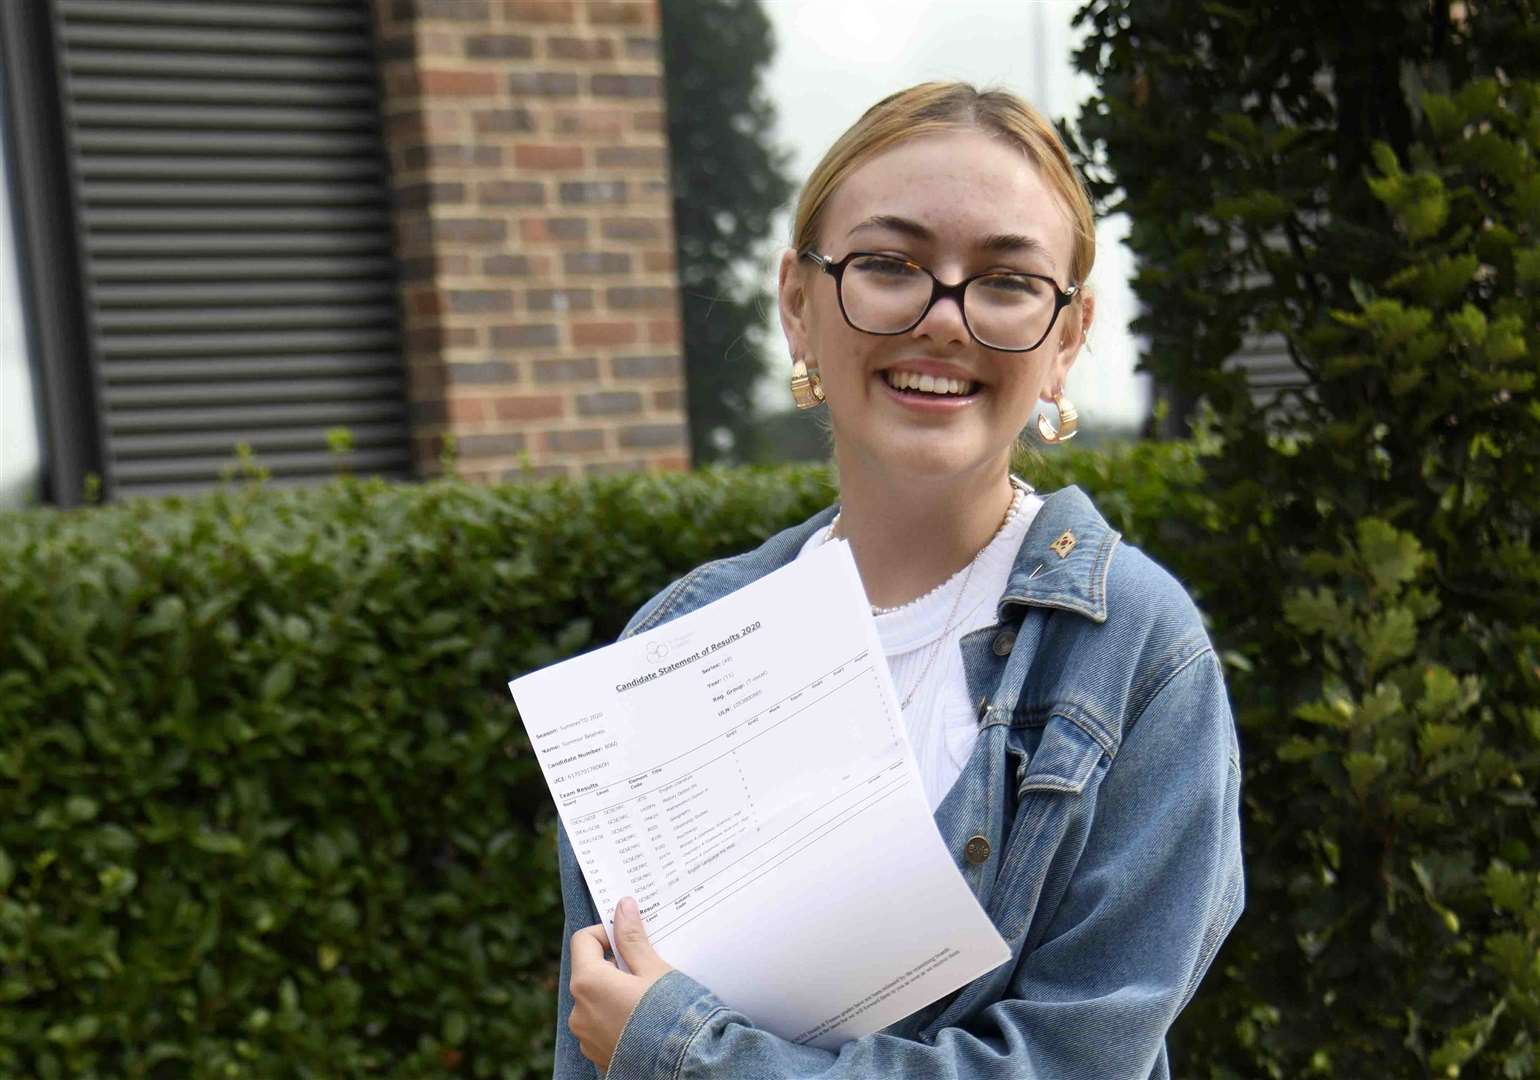 Summer Beames from St Augustine Academy in Maidstone achieved six grade 9s and 8s. She will now take up a scholarship at Sutton Valence School